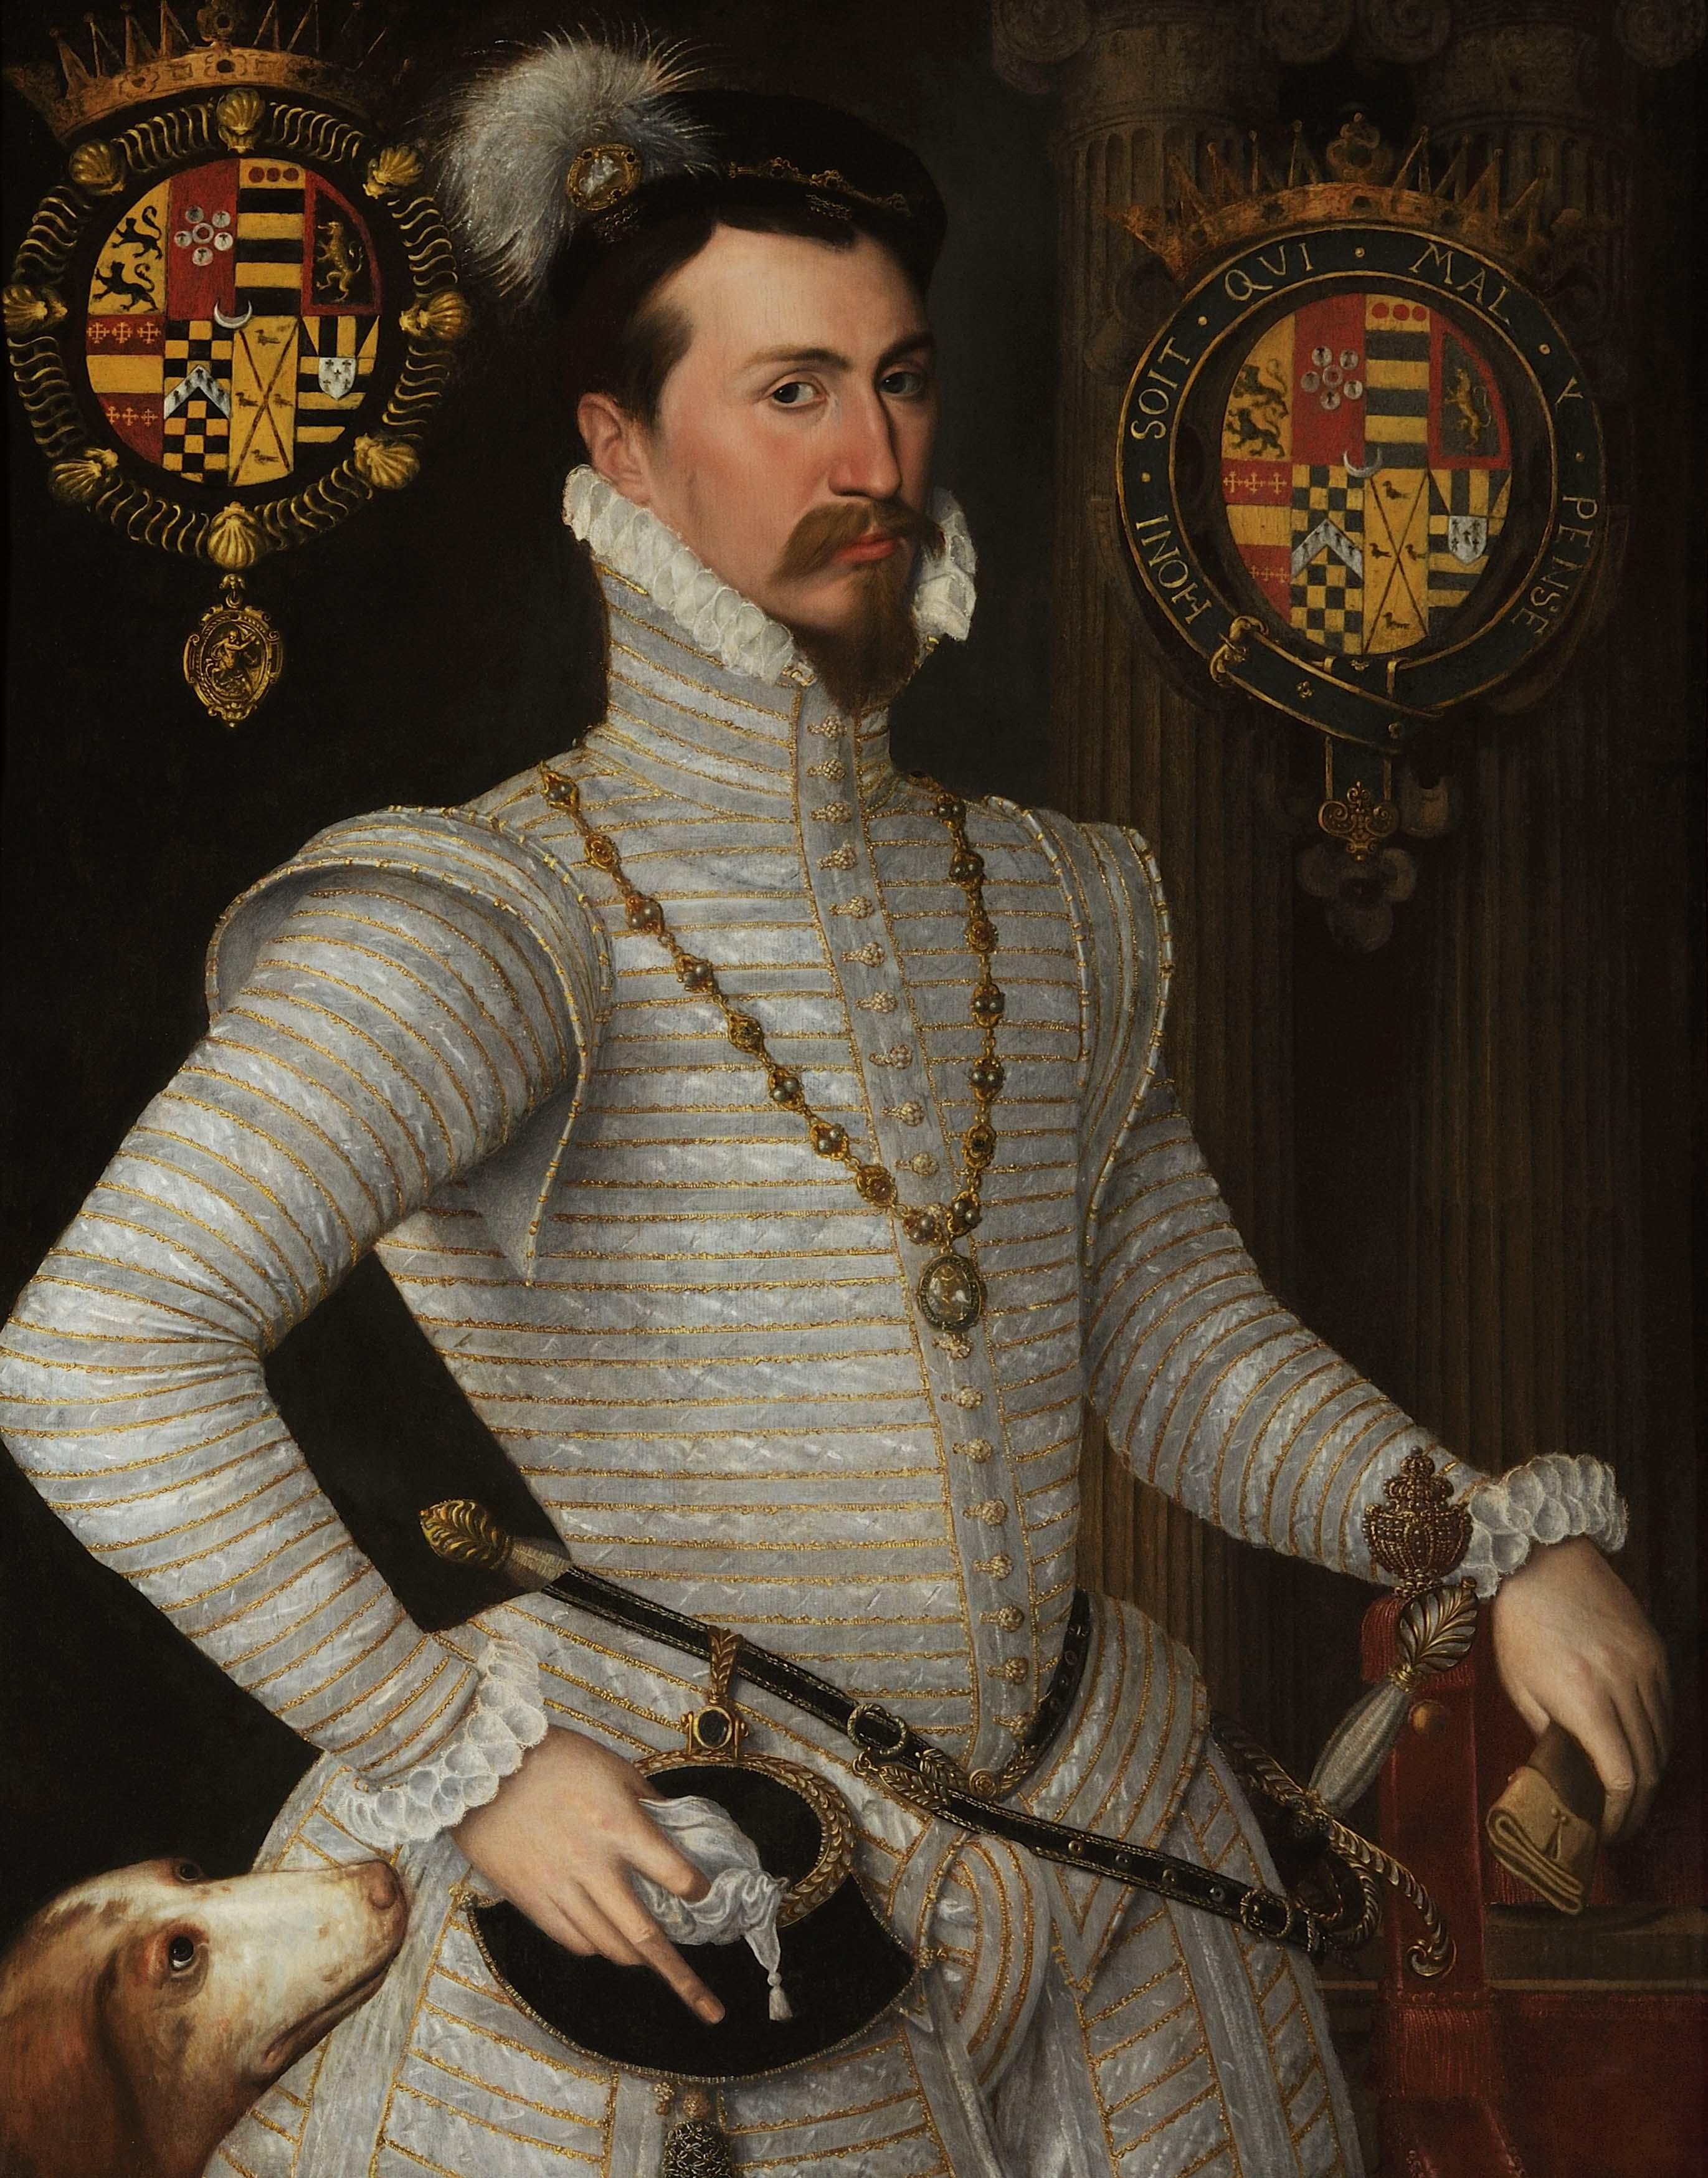 Robert Dudley, Earl of Leicester owner of Kenilworth Castle